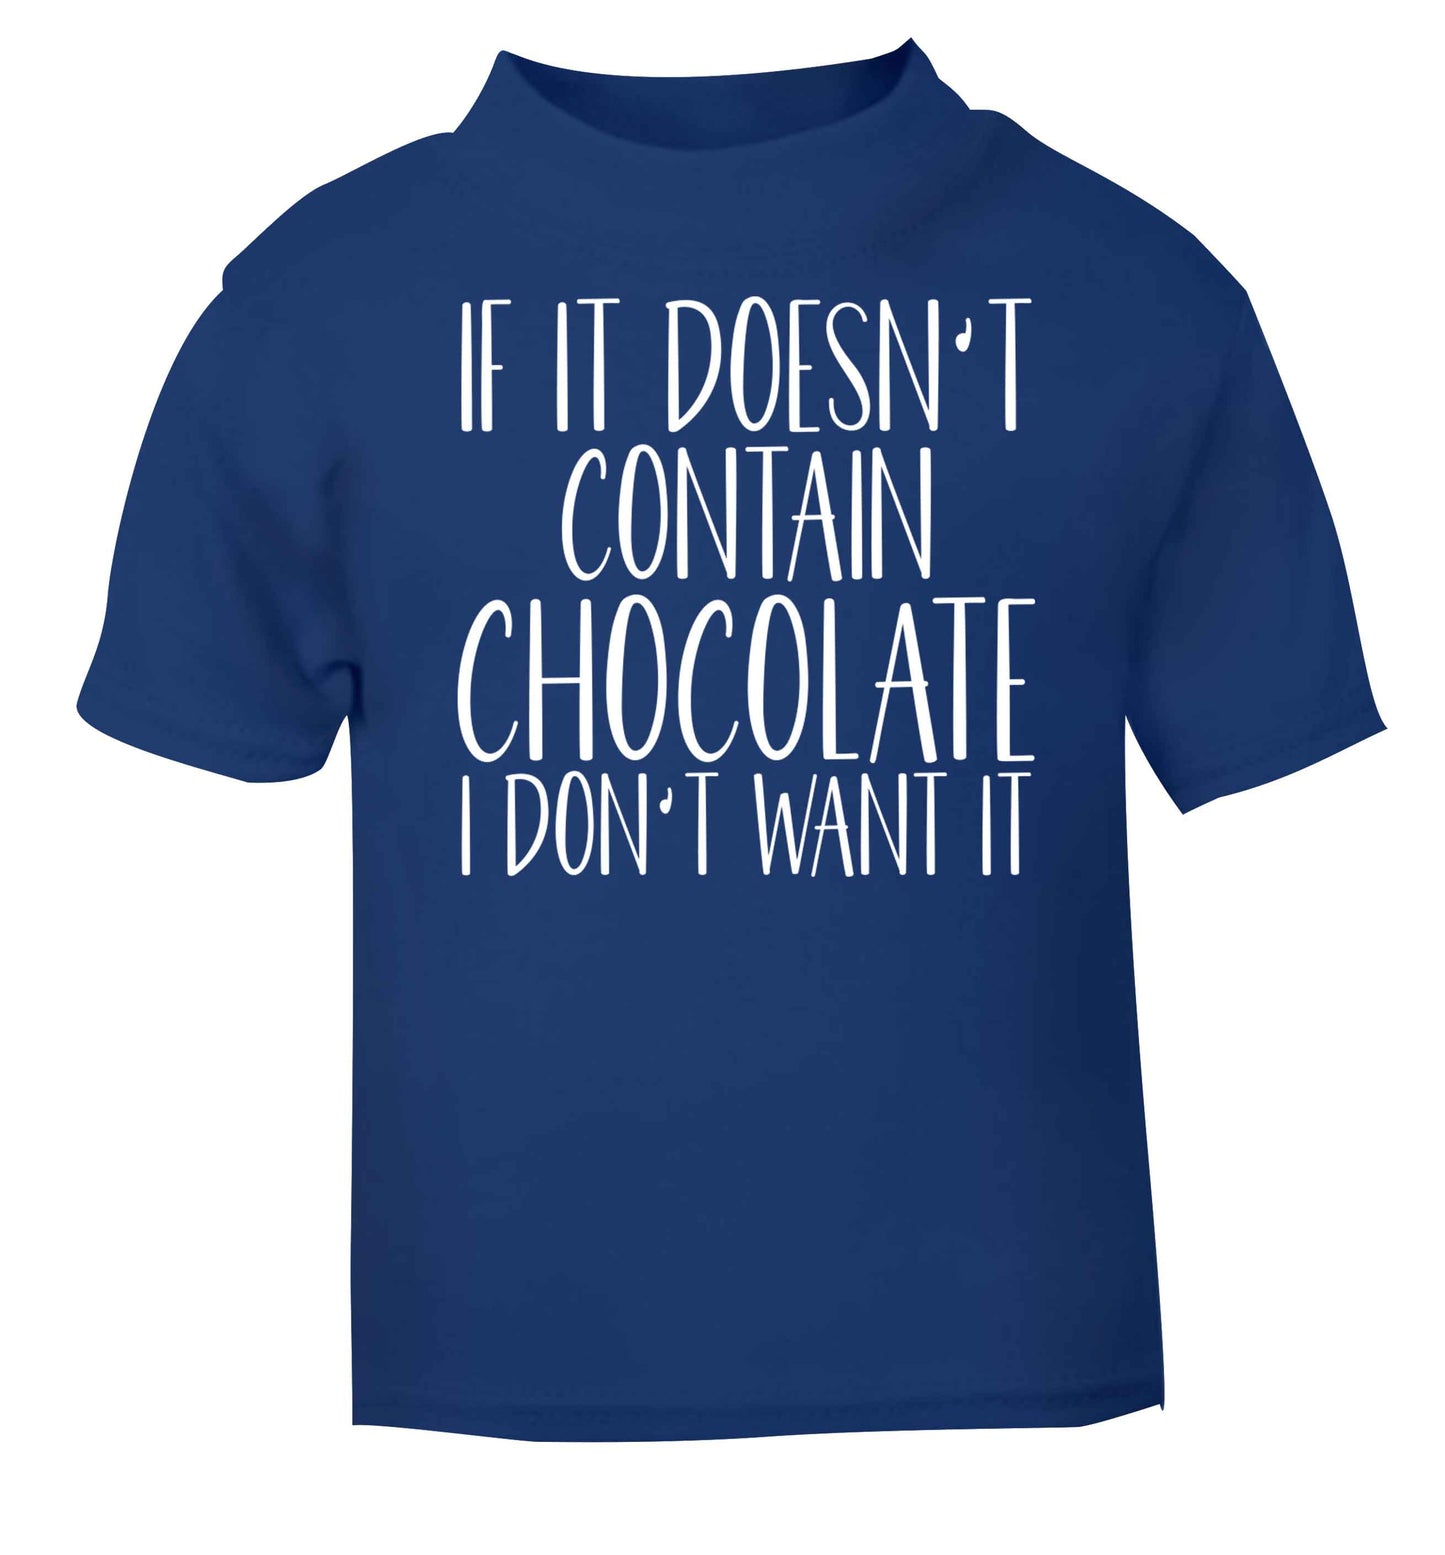 If it doesn't contain chocolate I don't want it blue baby toddler Tshirt 2 Years